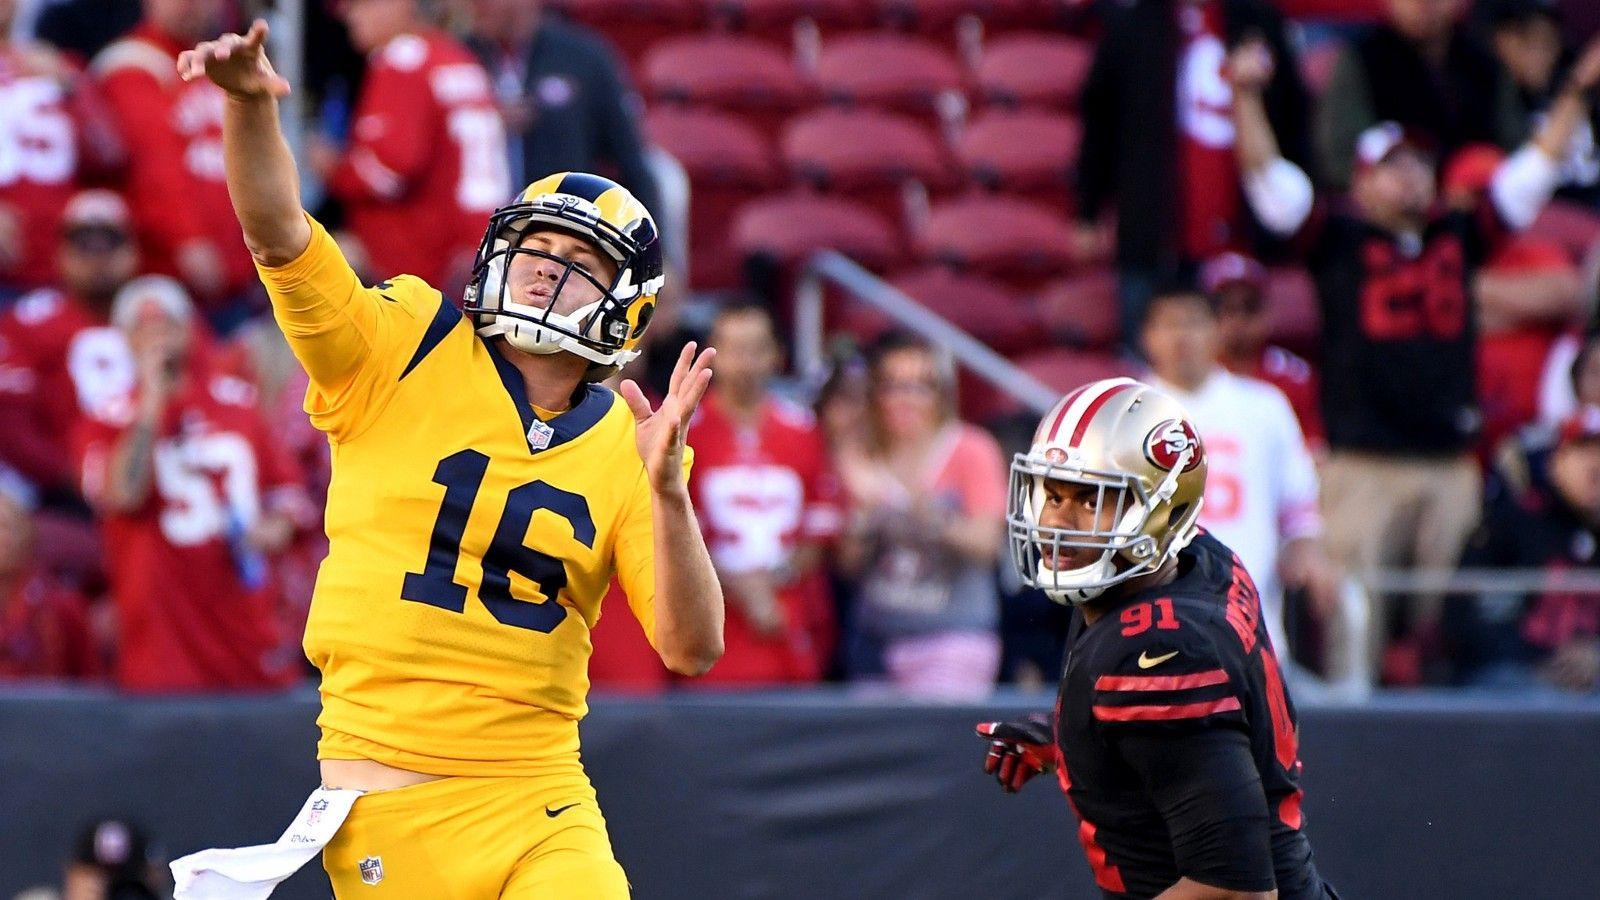 JARED GOFF PROVES HE IS NOT RYAN LEAF